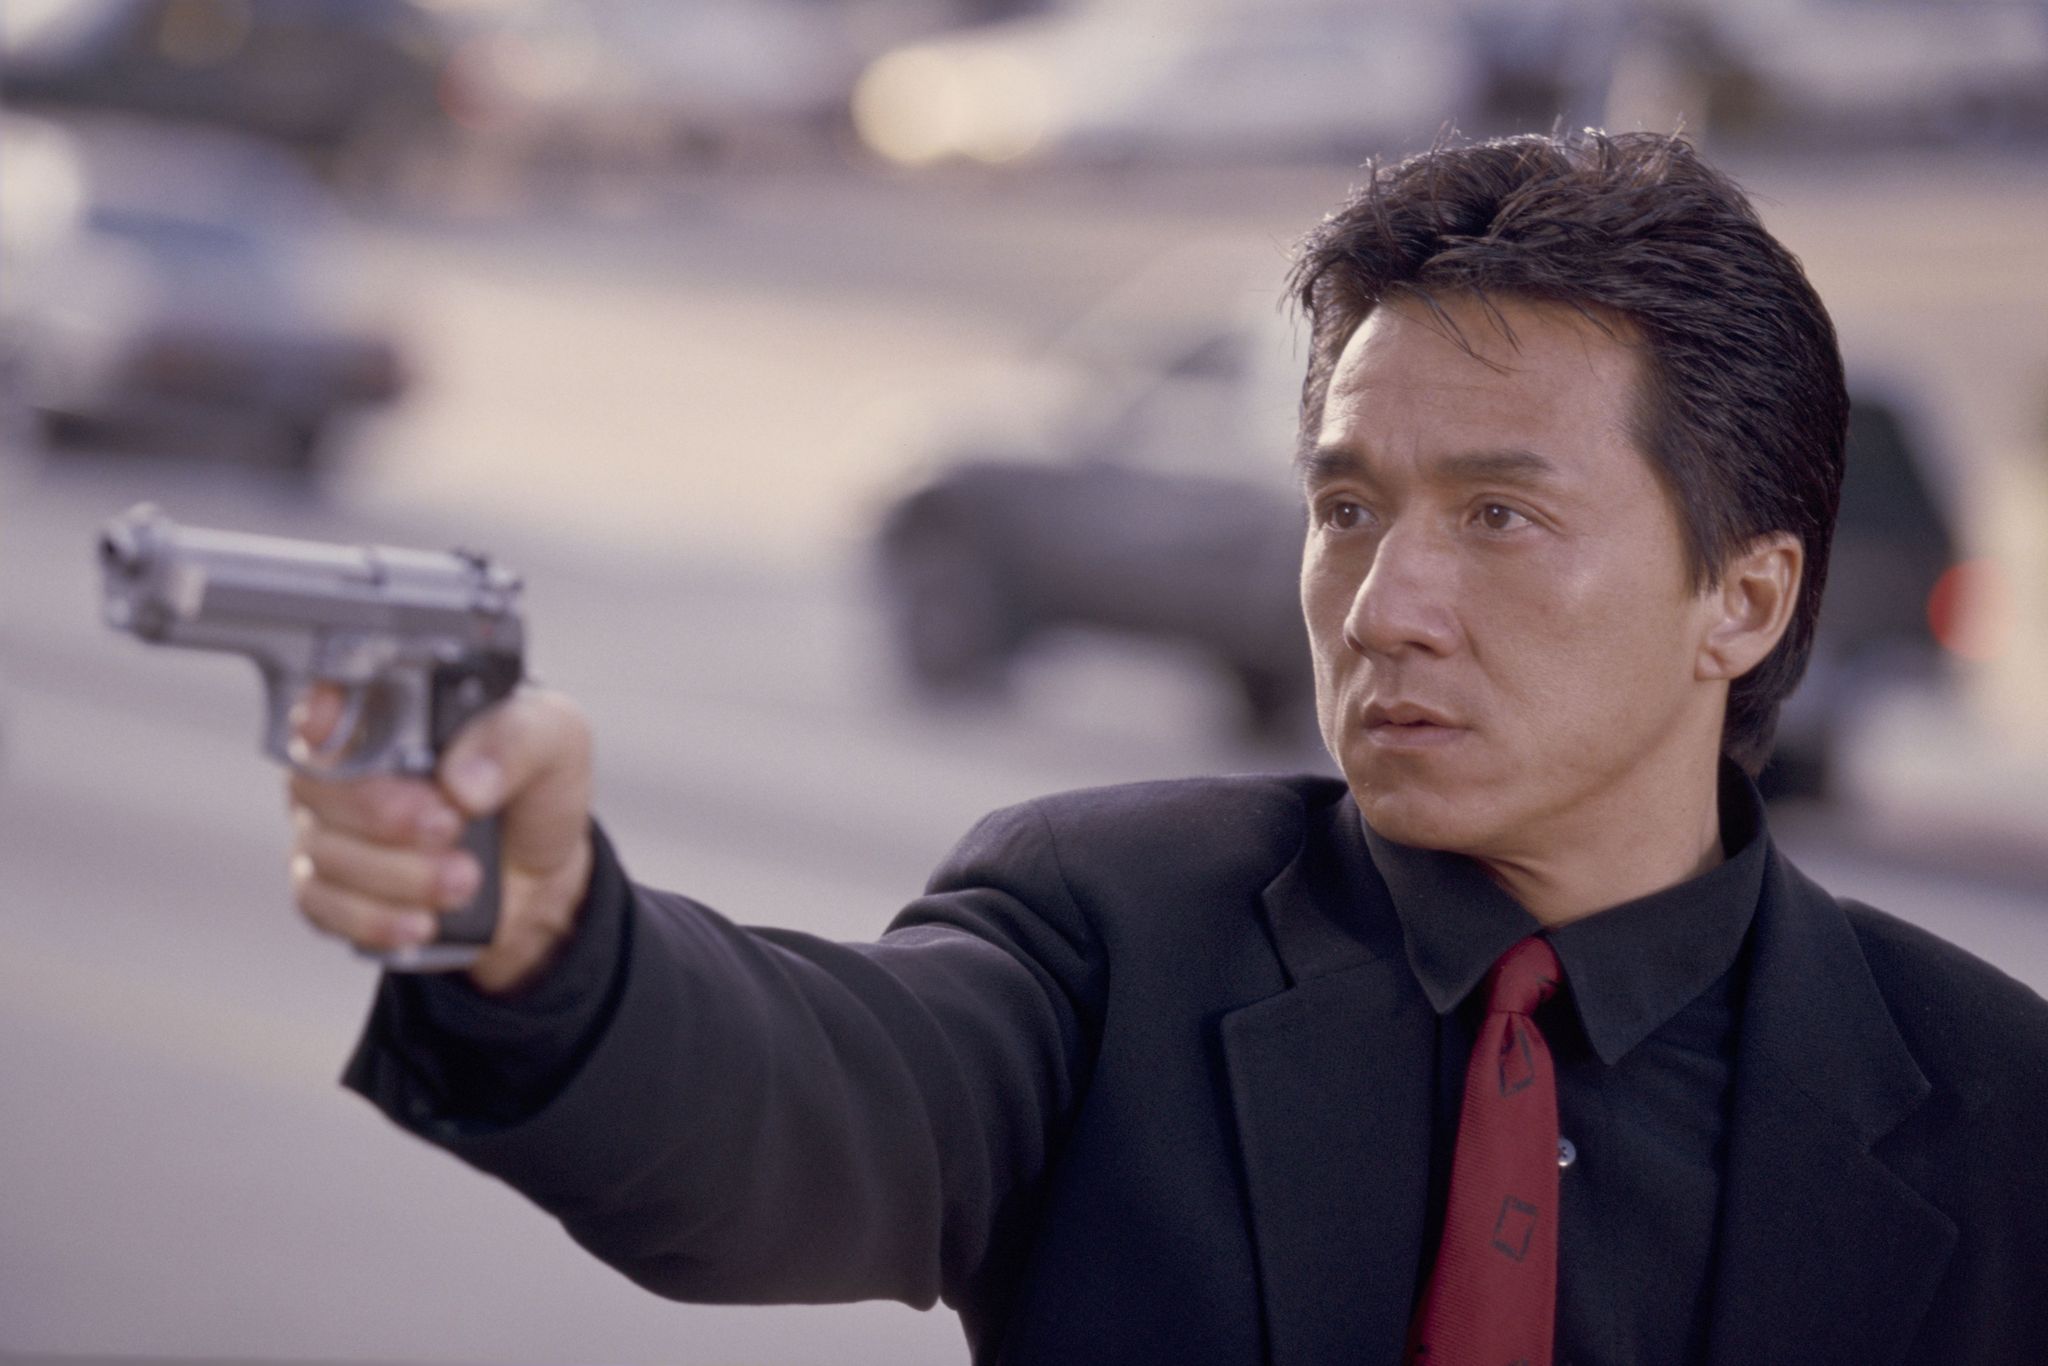 Jackie Chan in the movie Rush Hour